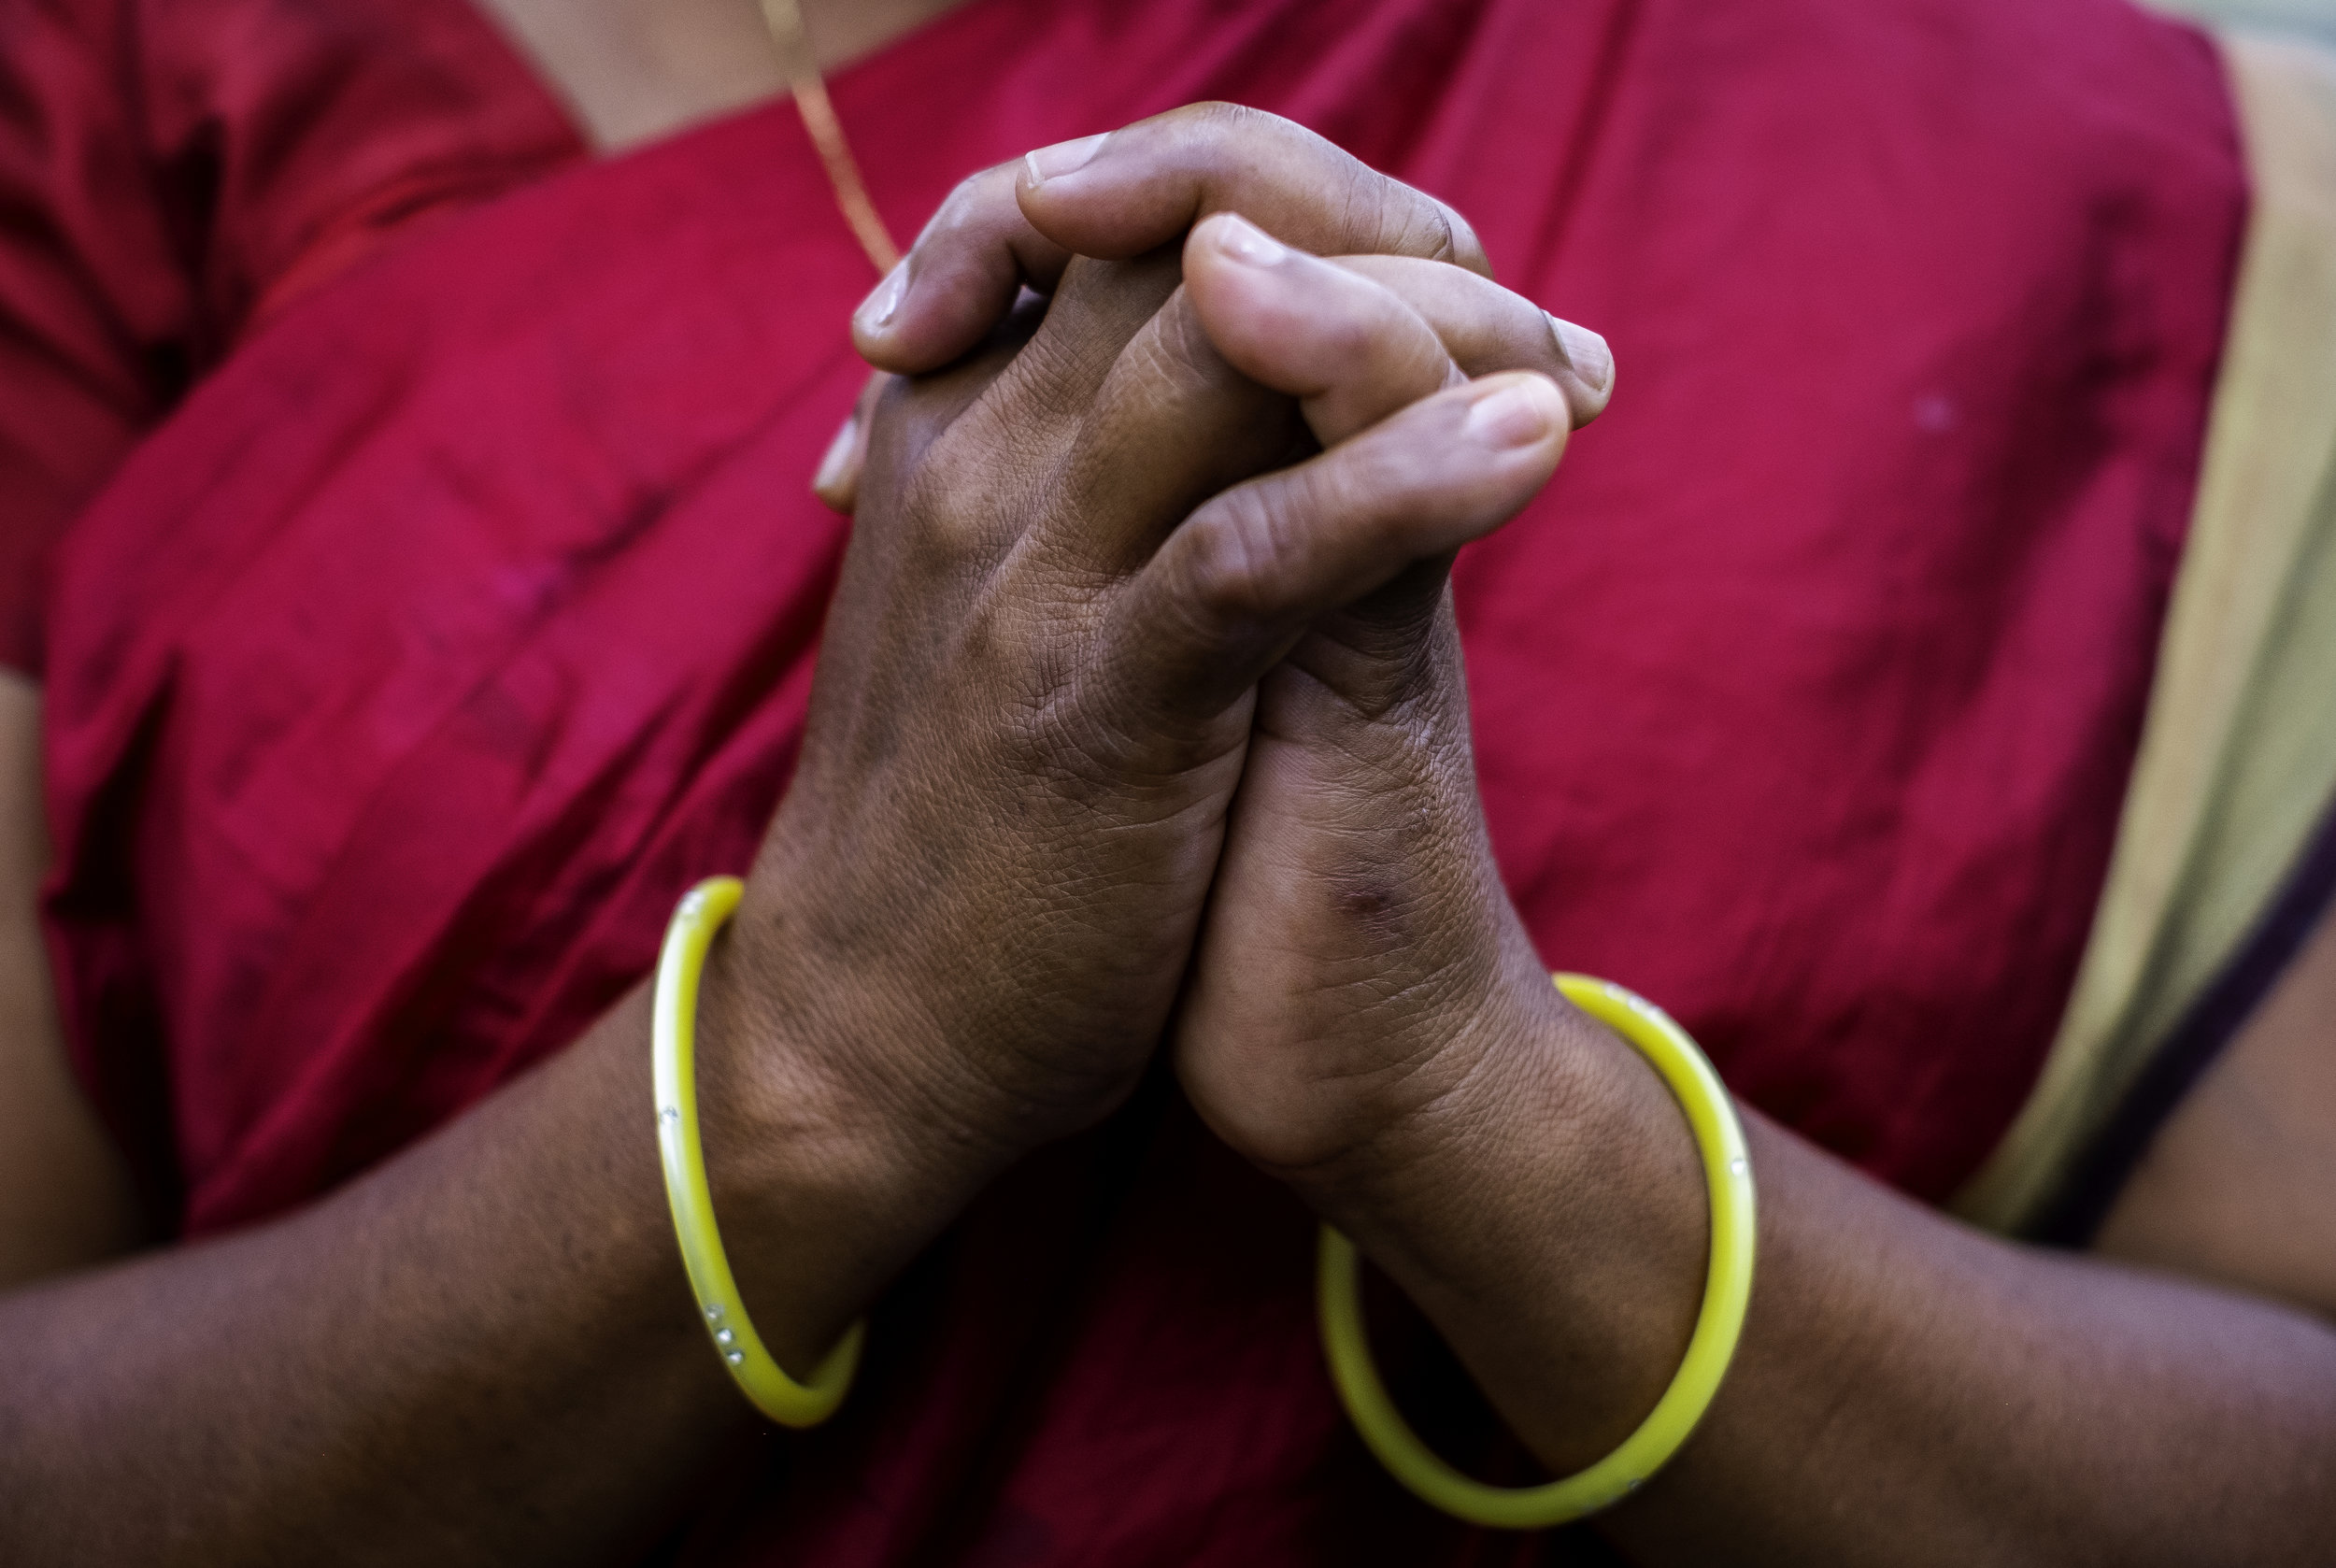   A widow in Kandhamal, India, folds her hands in prayer. During the Summer of 2008 a mob of Hindu nationalists aligned with Prime Minister Narendra Modi’s BJP party, murdered her husband before her eyes for their Christian faith. After 10 years, she